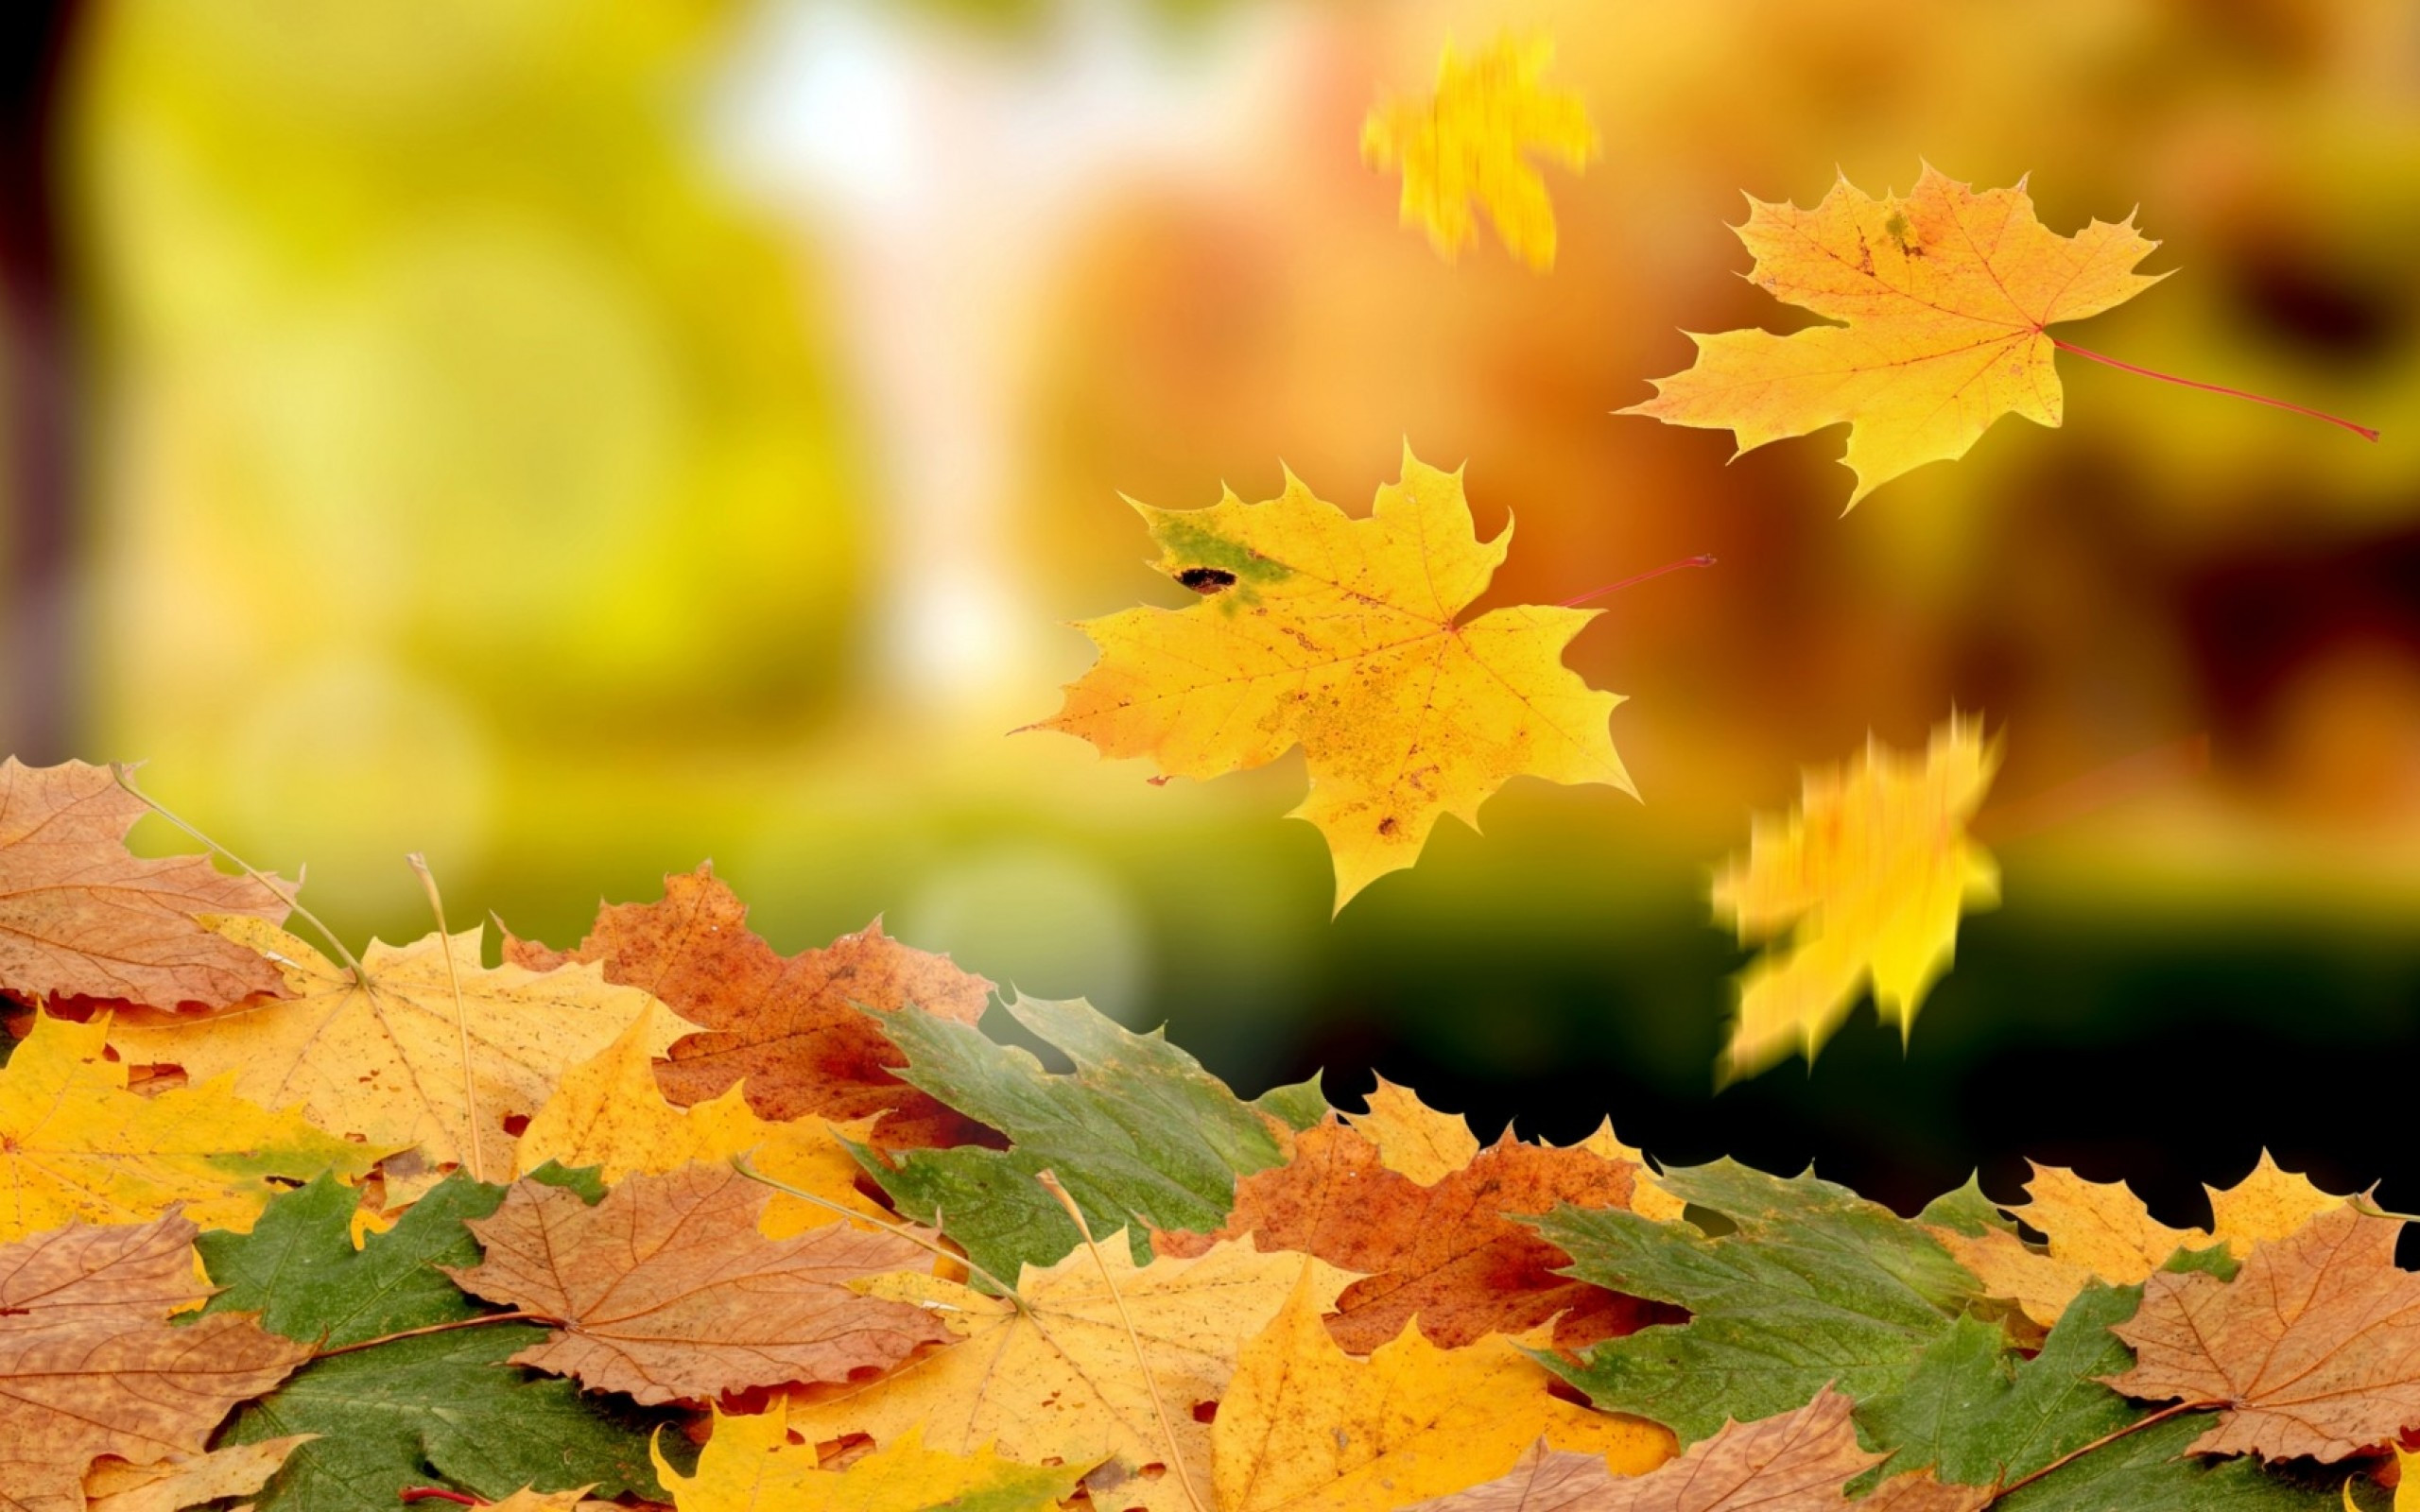 Download 2560x1600 Autumn, Leaves, Fall, Close Up Wallpaper For MacBook Pro 13 Inch